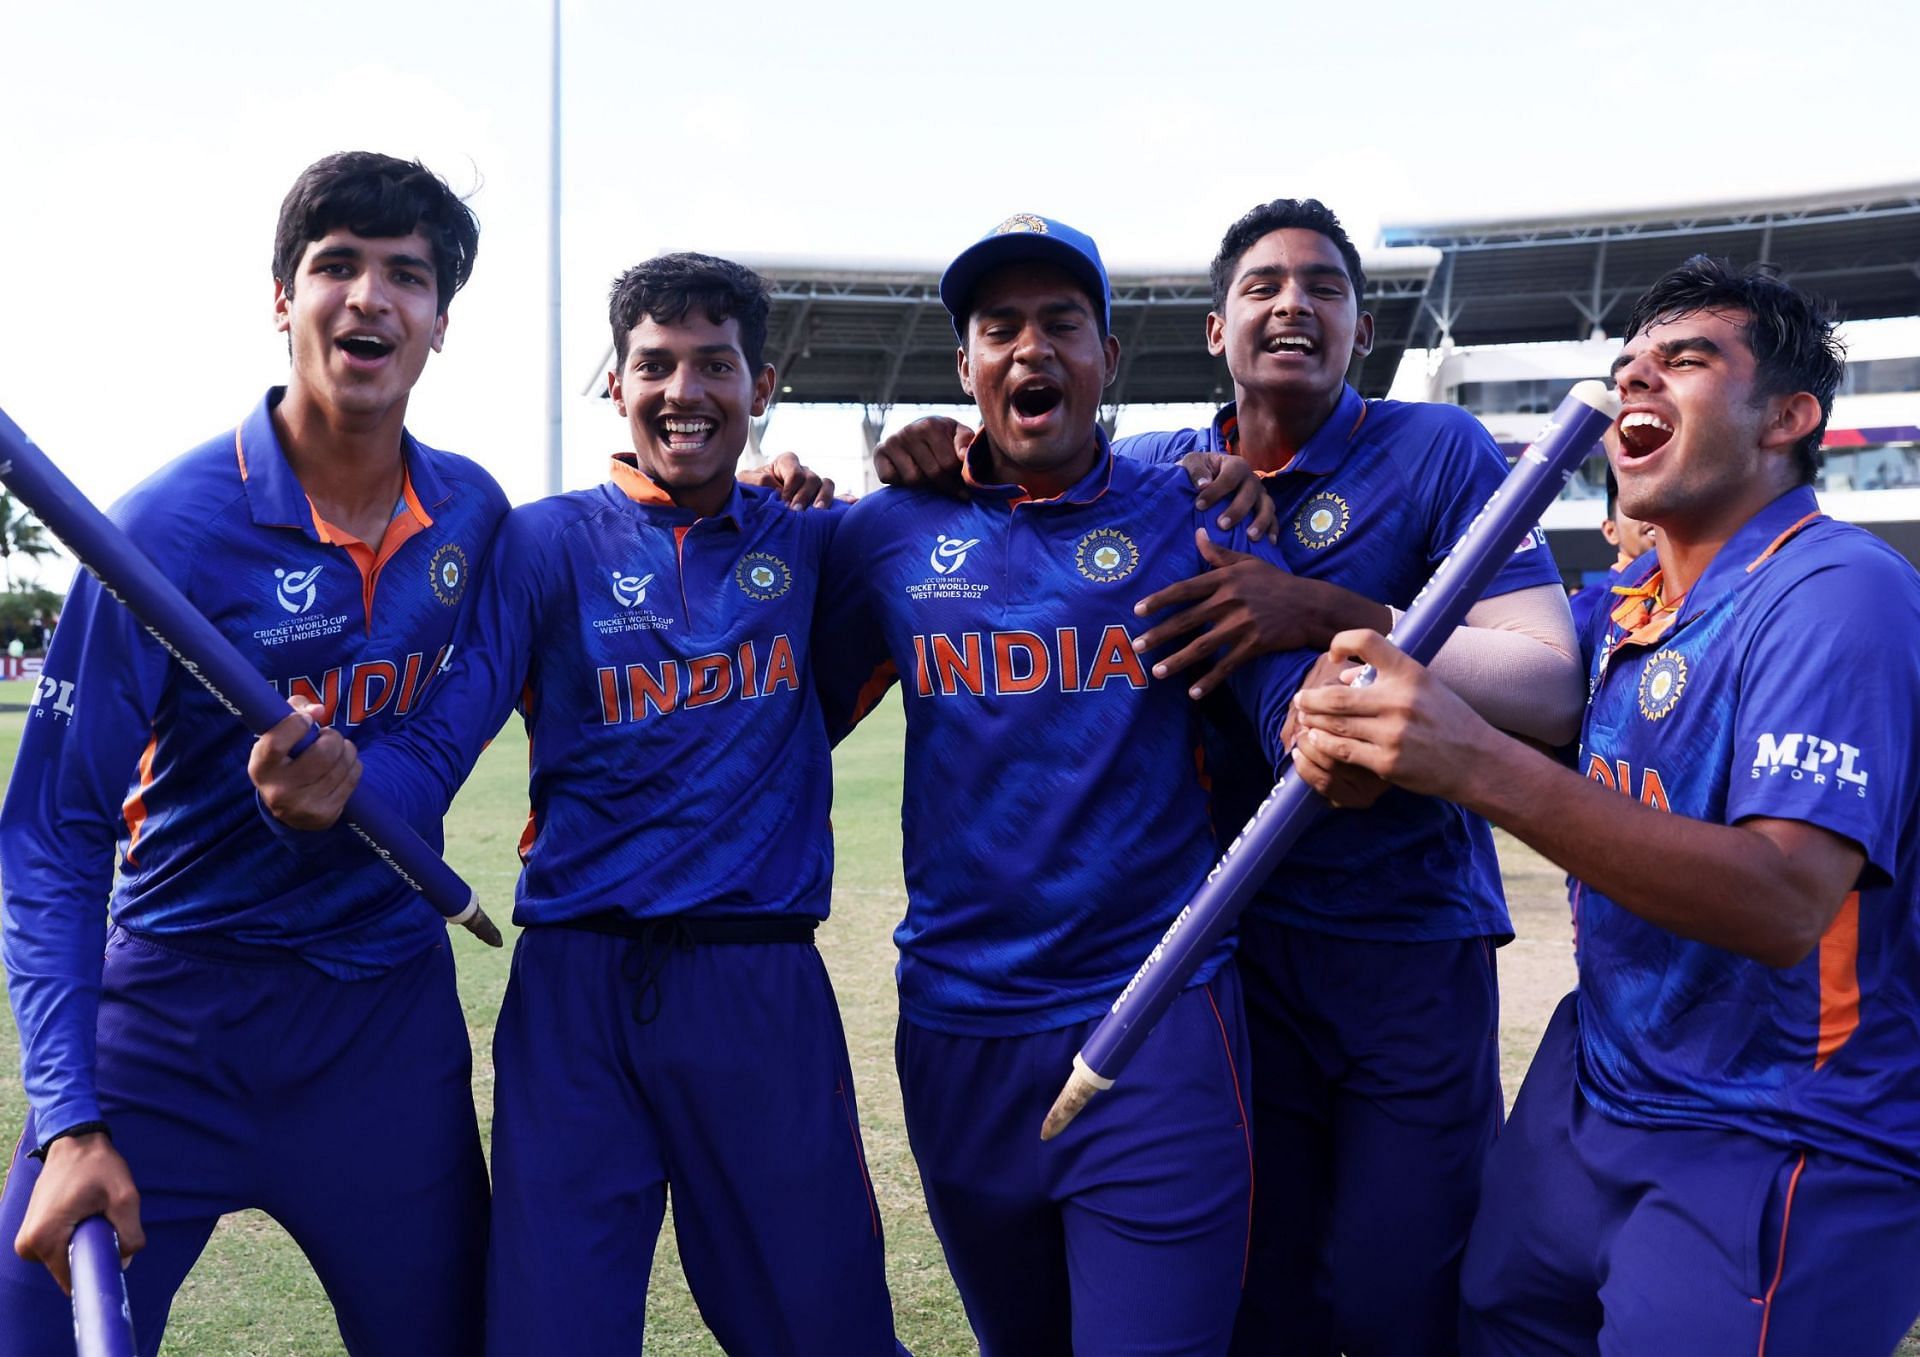 India won a record fifth ICC U19 World Cup title on Saturday, February 5 (Picture credits: Twitter/BCCI).